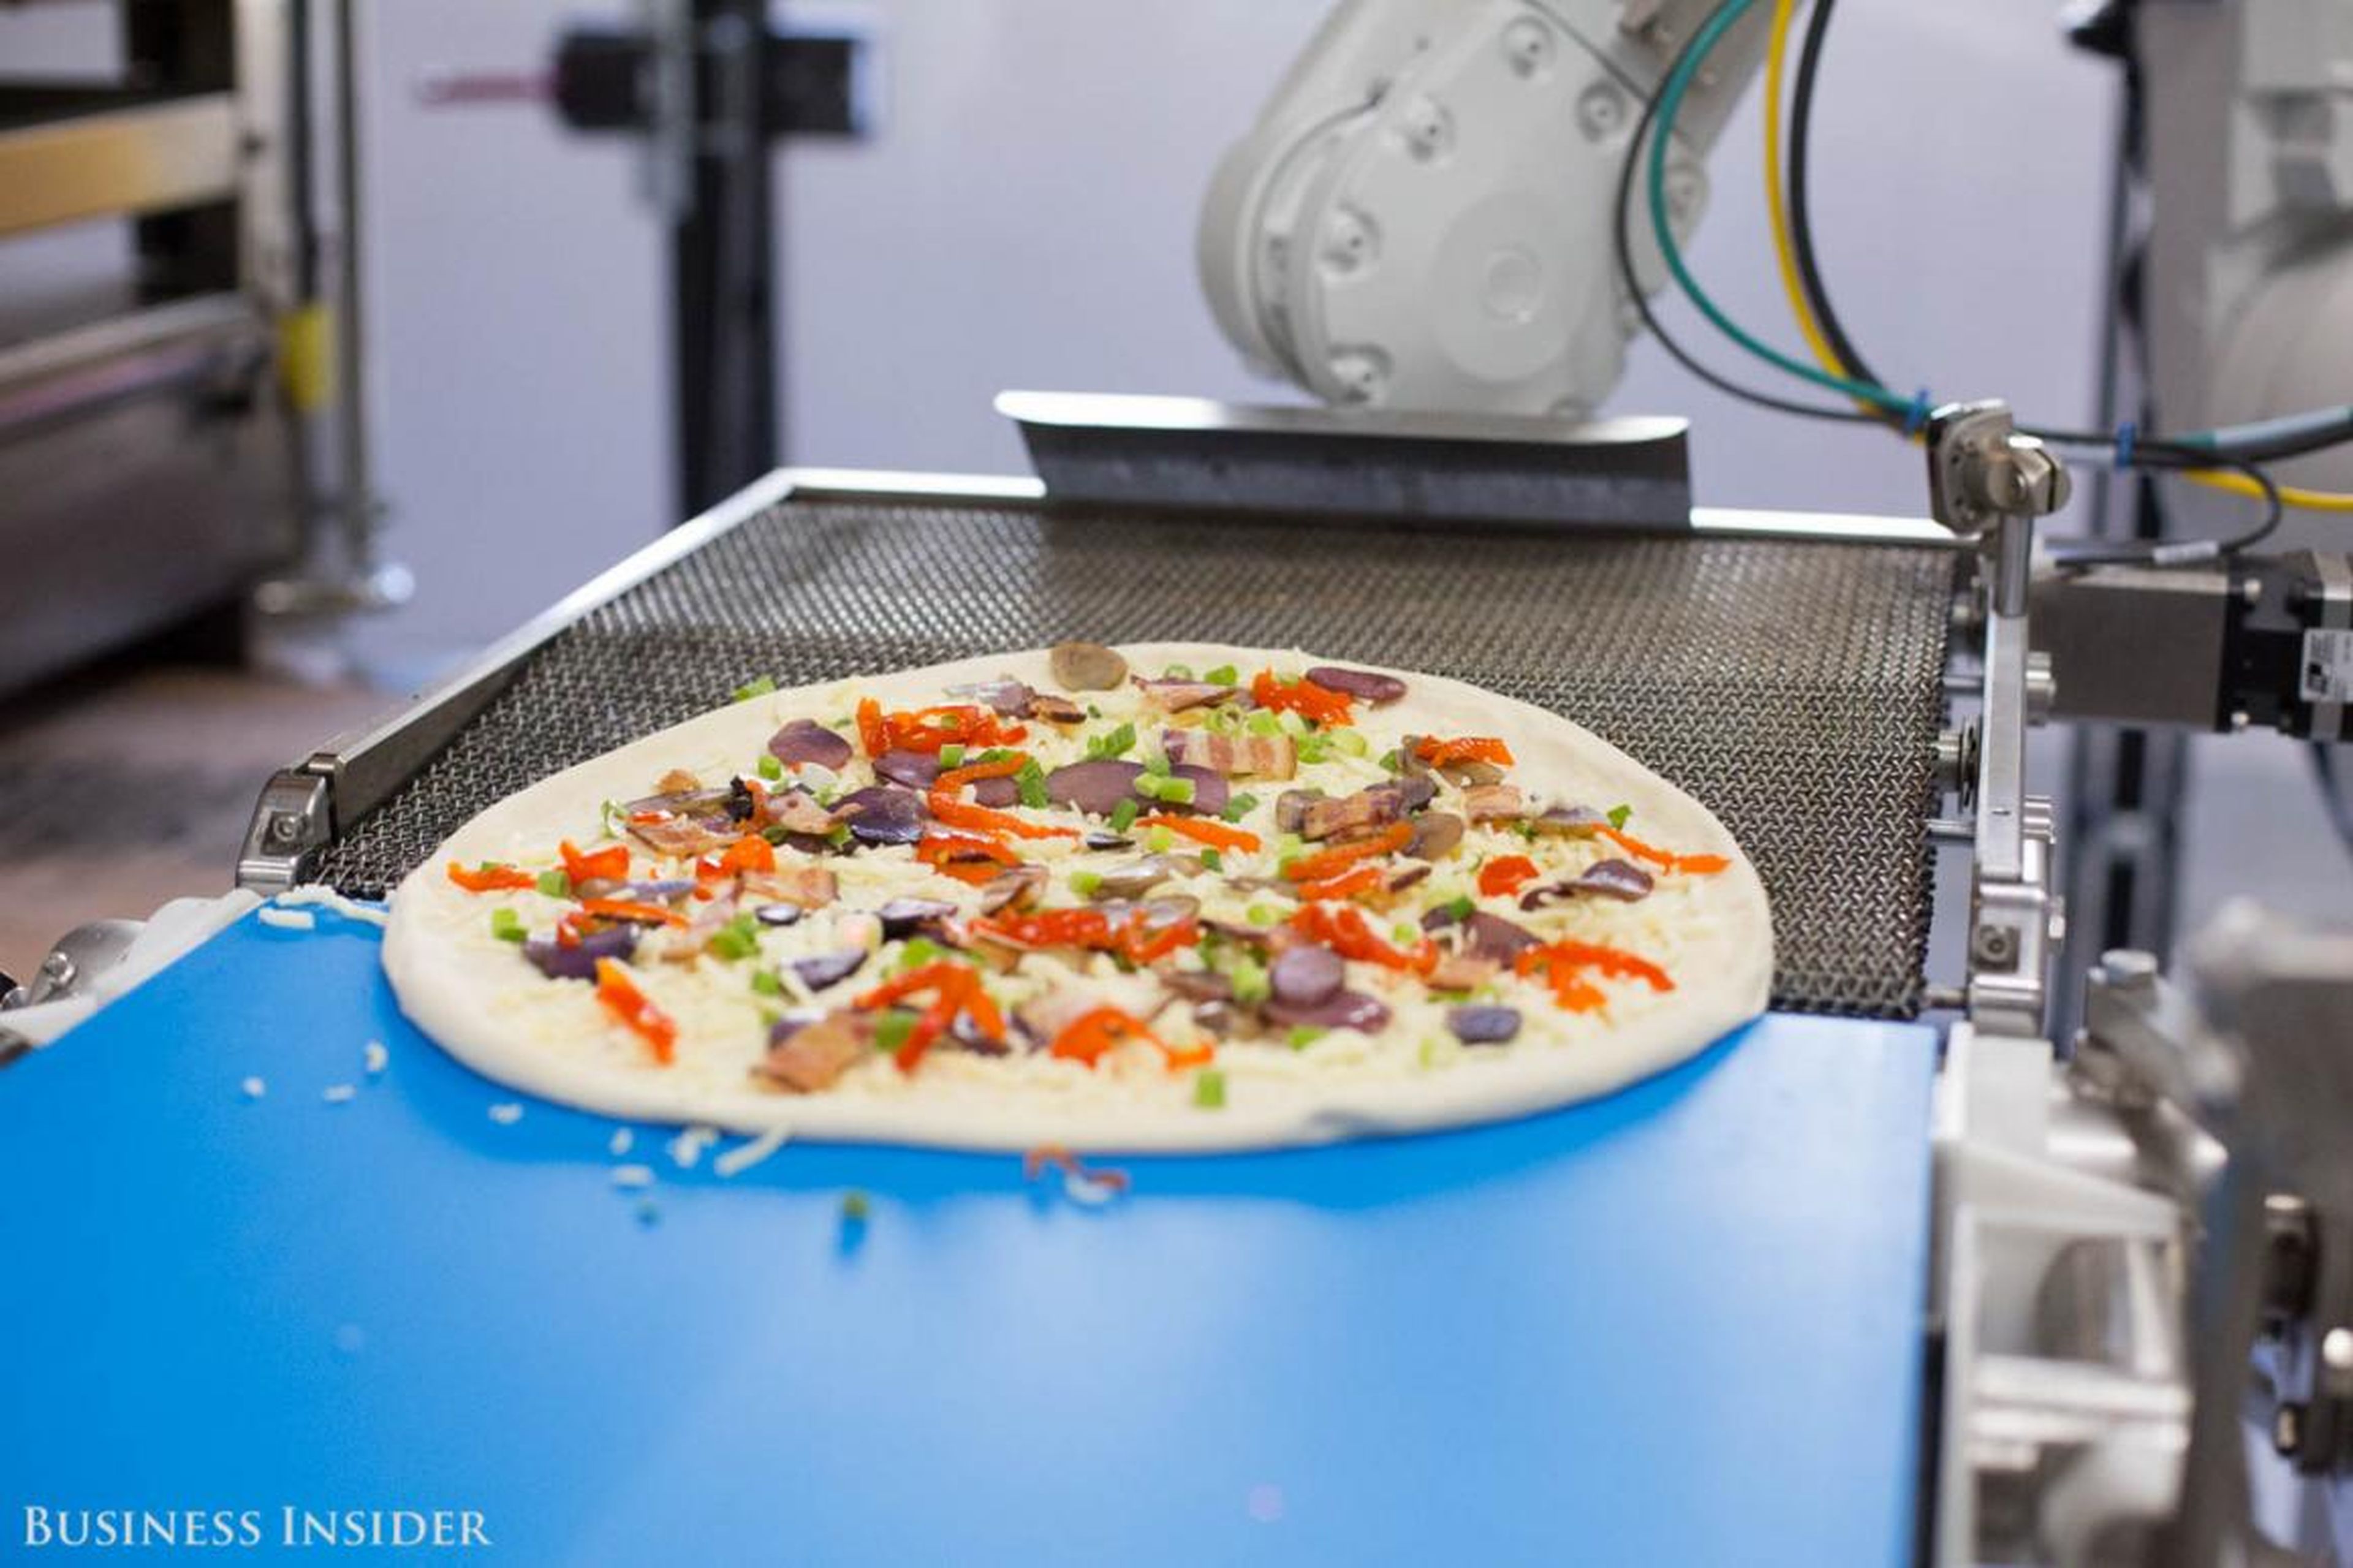 The recipe wasn't perfect, but quality pizza that's delivered in under 20 minutes — and costs less than Domino's — could make Zume a worthy competitor in the pizza arena.